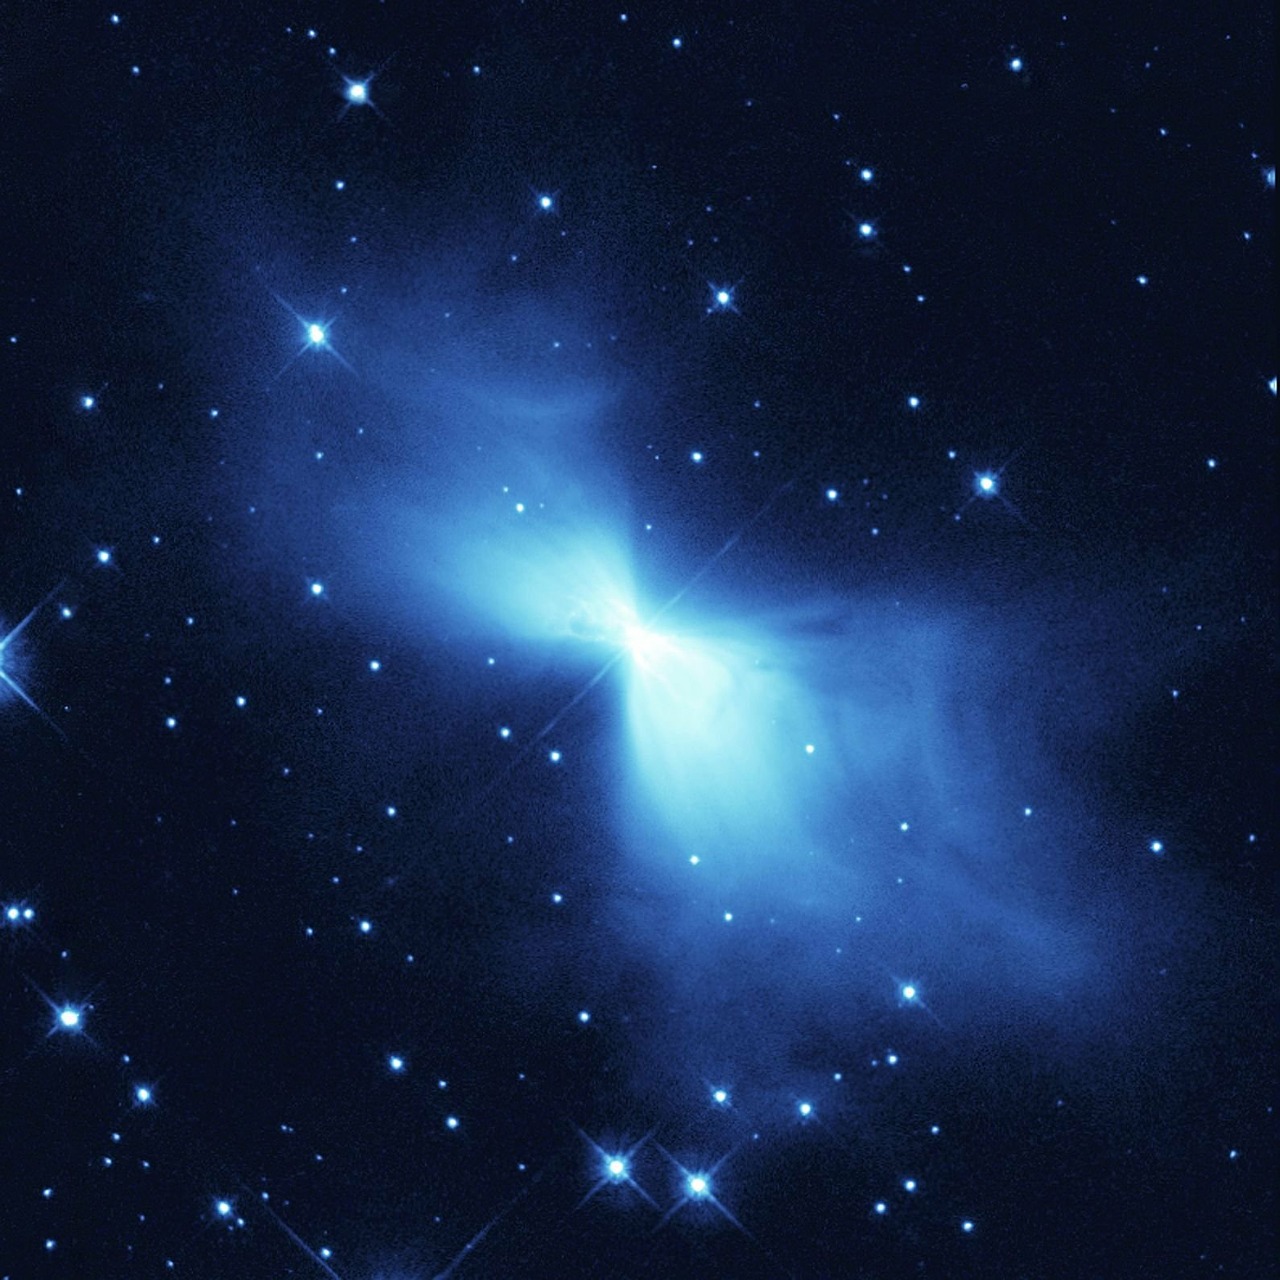 boomerang nebula,fog,constellation zentaur,starry sky,space,universe,all,night sky,sky,astronautics,nasa,space travel,free pictures, free photos, free images, royalty free, free illustrations, public domain